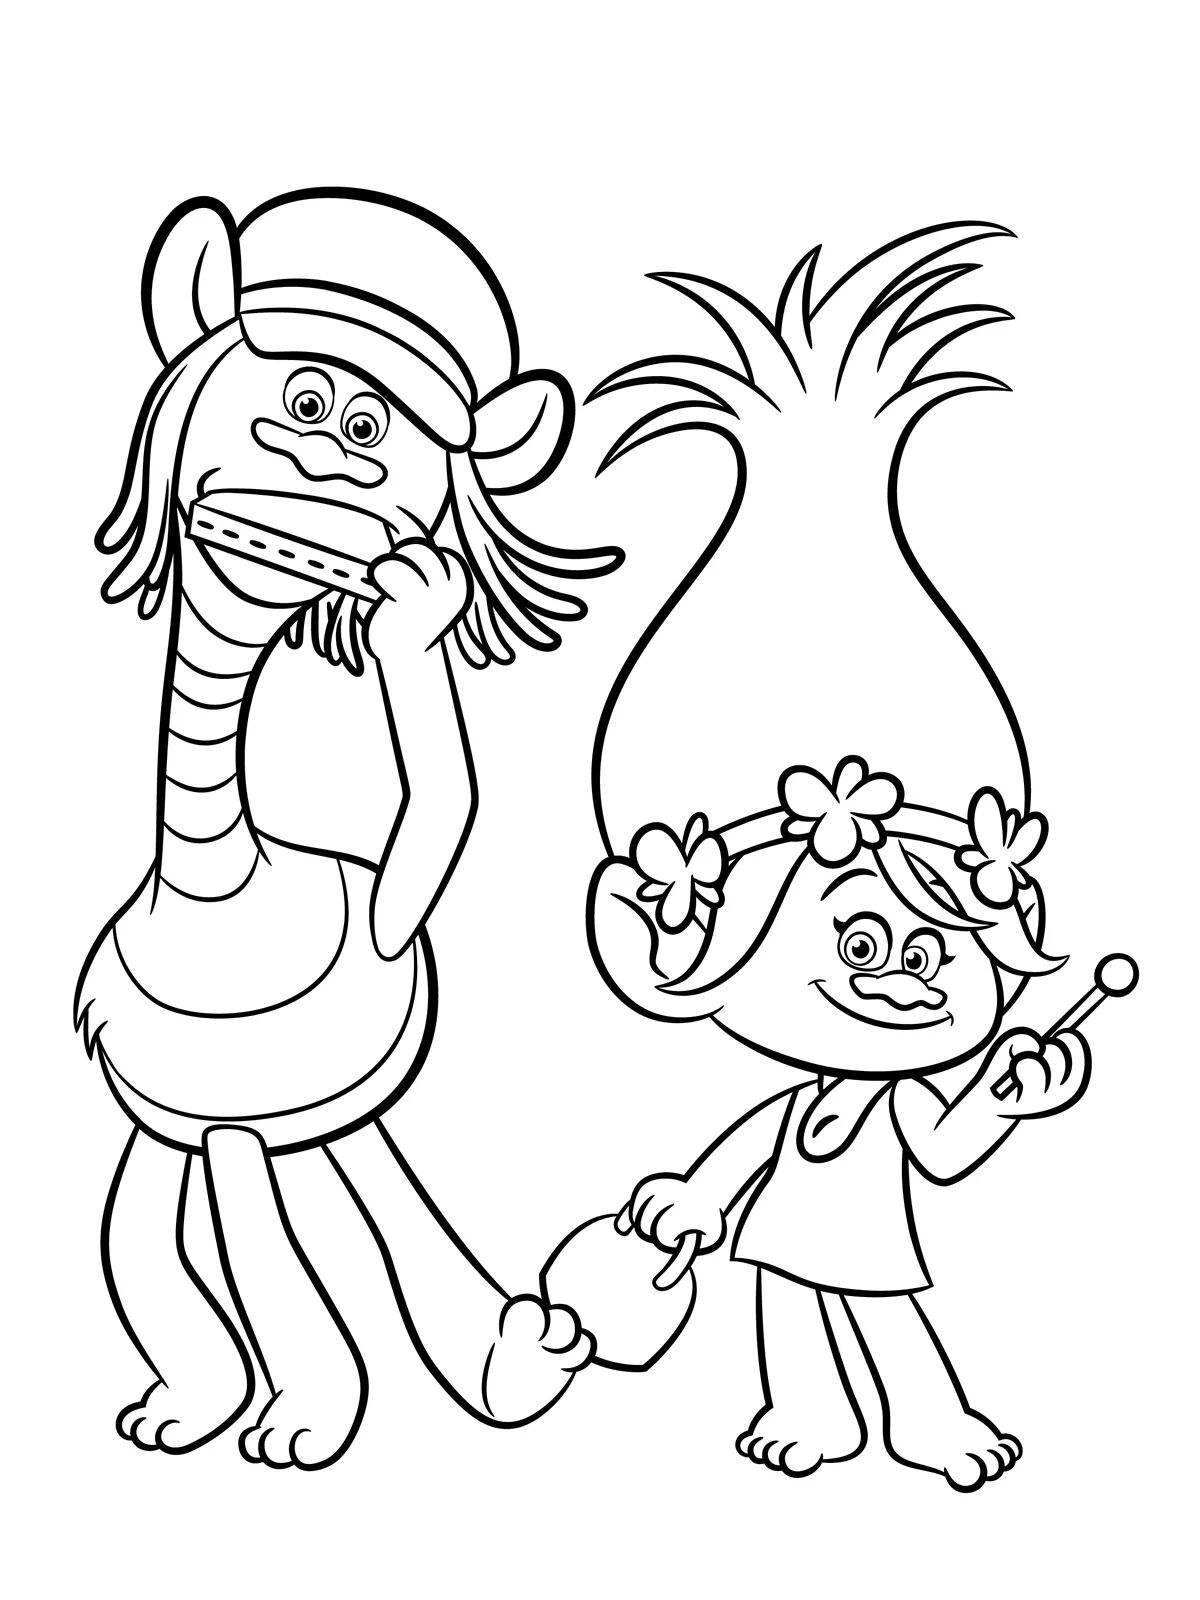 Funny cartoon trolls coloring pages